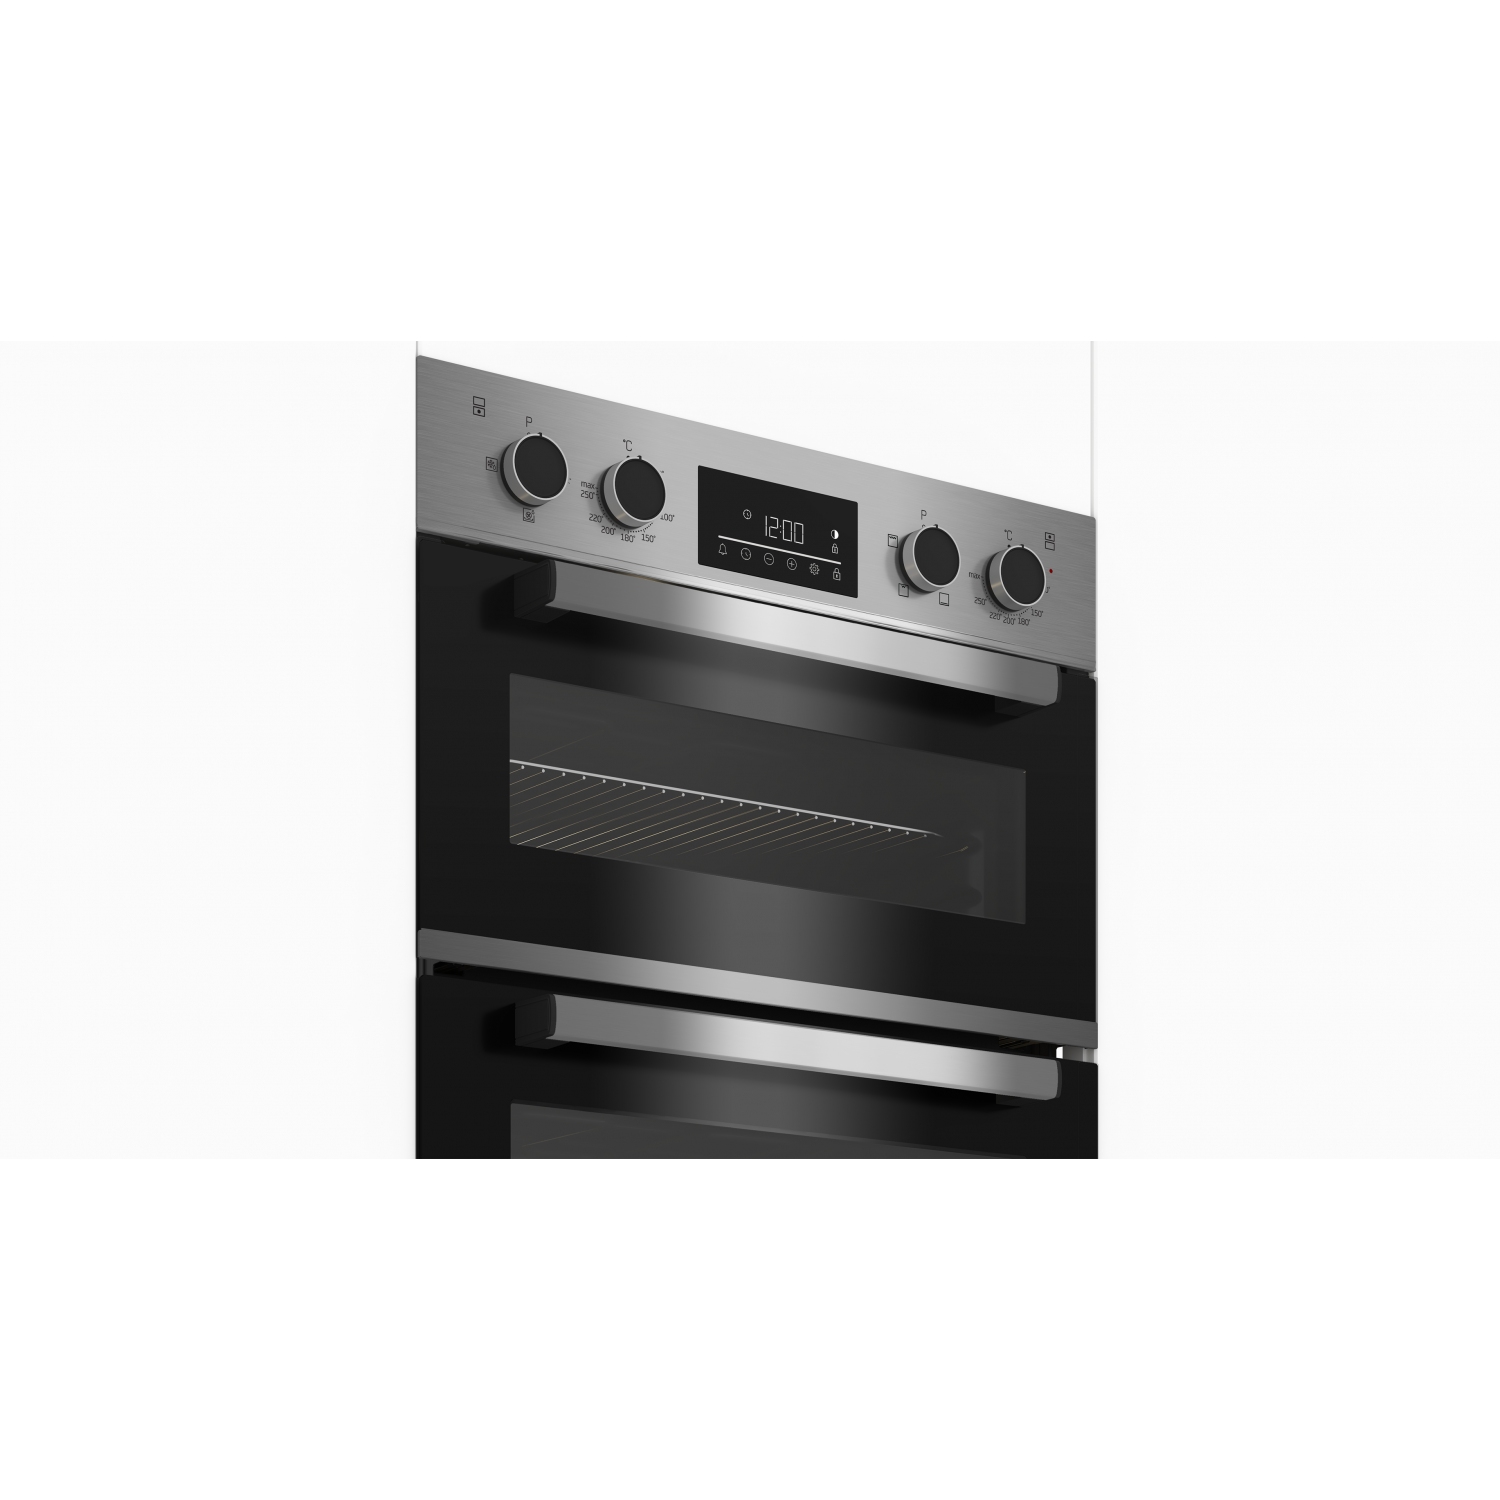 Beko CDFY22309X 60cm Built In High Specification RecycledNet Double Oven - Stainless Steel - 3